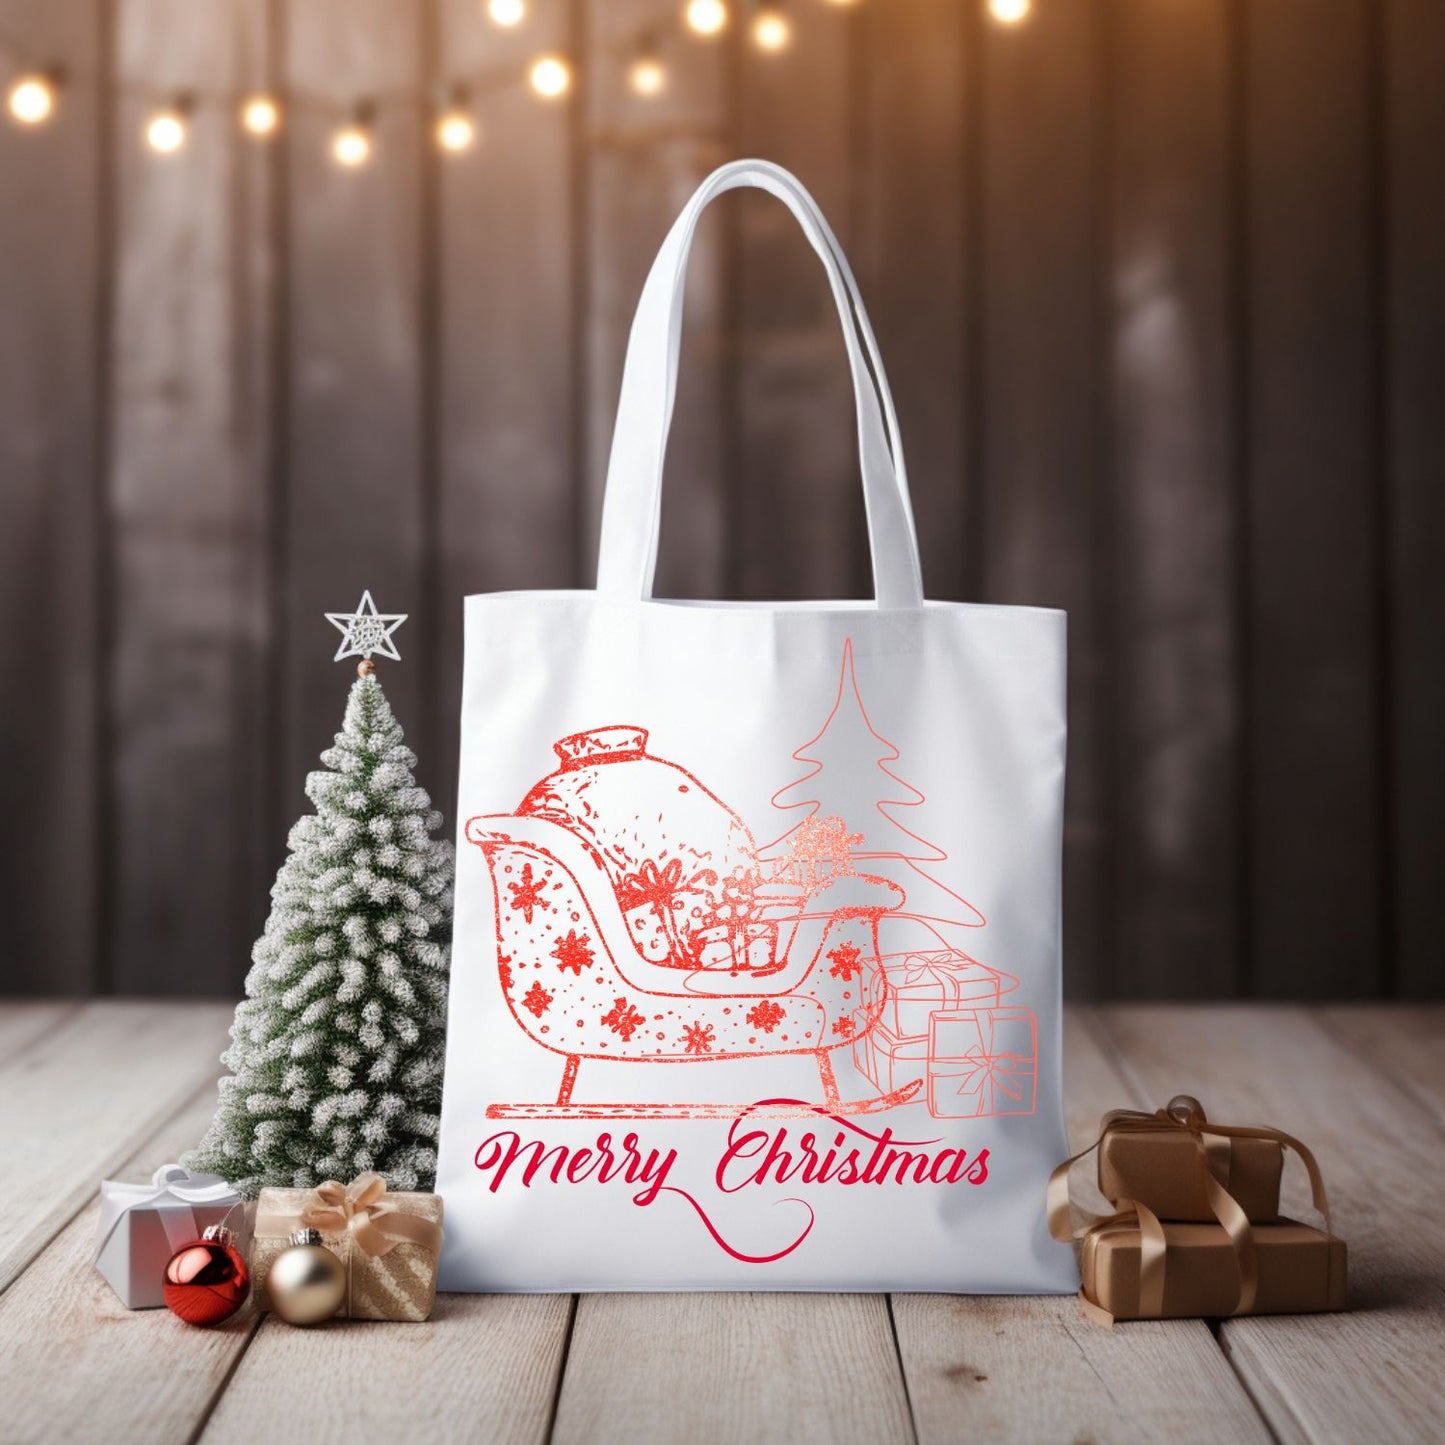 Christmas Tote Bag | Family Gift | Xmas Tree Stylish Carryall Accessories   